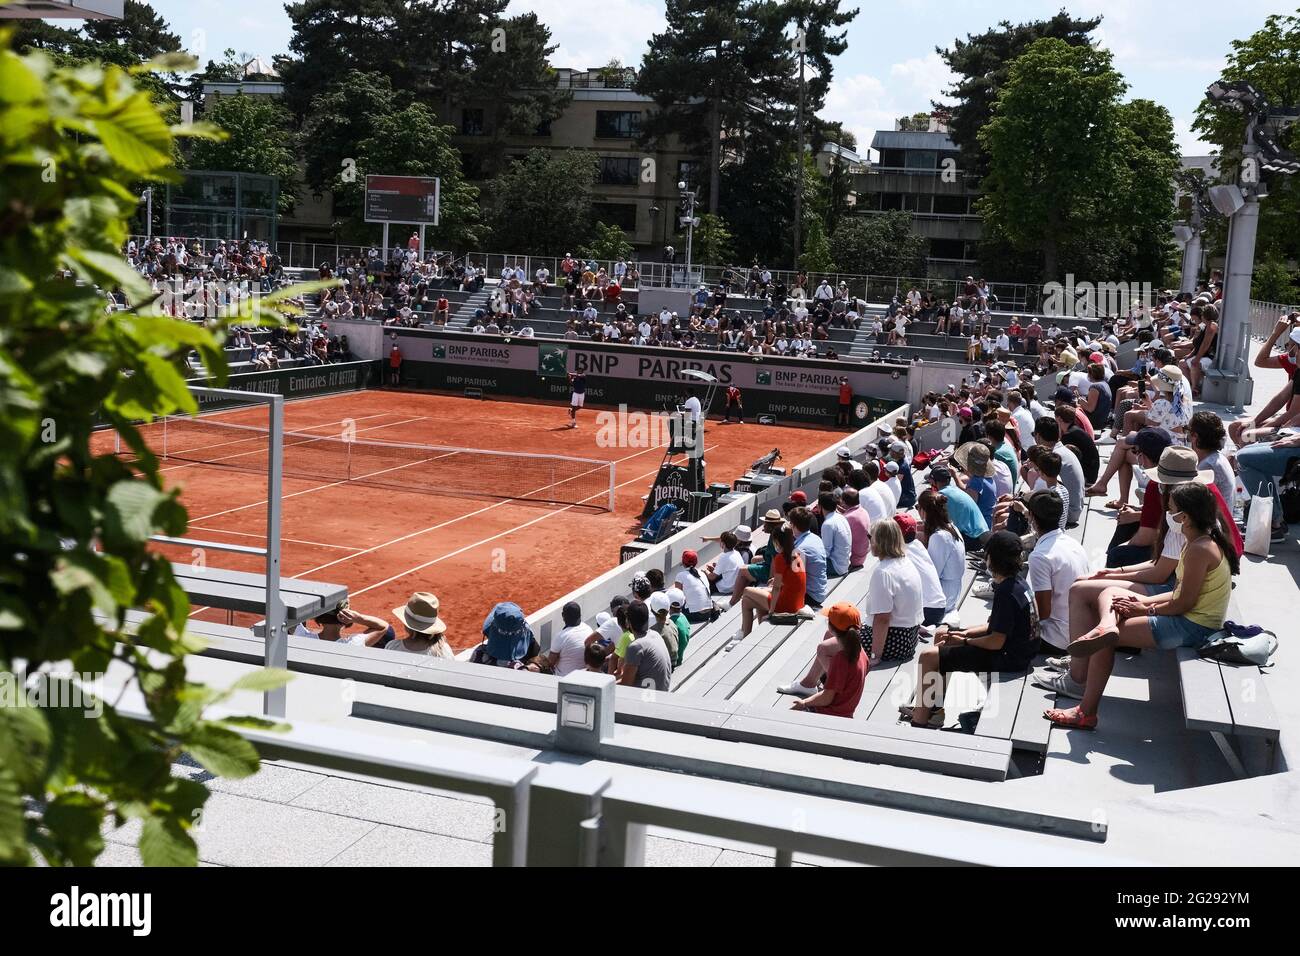 Paris, France. 09th June, 2021. Tennis: Grand Slam, French Open. Visitors  sitting in the stands. Due to the new Corona rules since June 9, 2021, more  people are allowed into the Stade